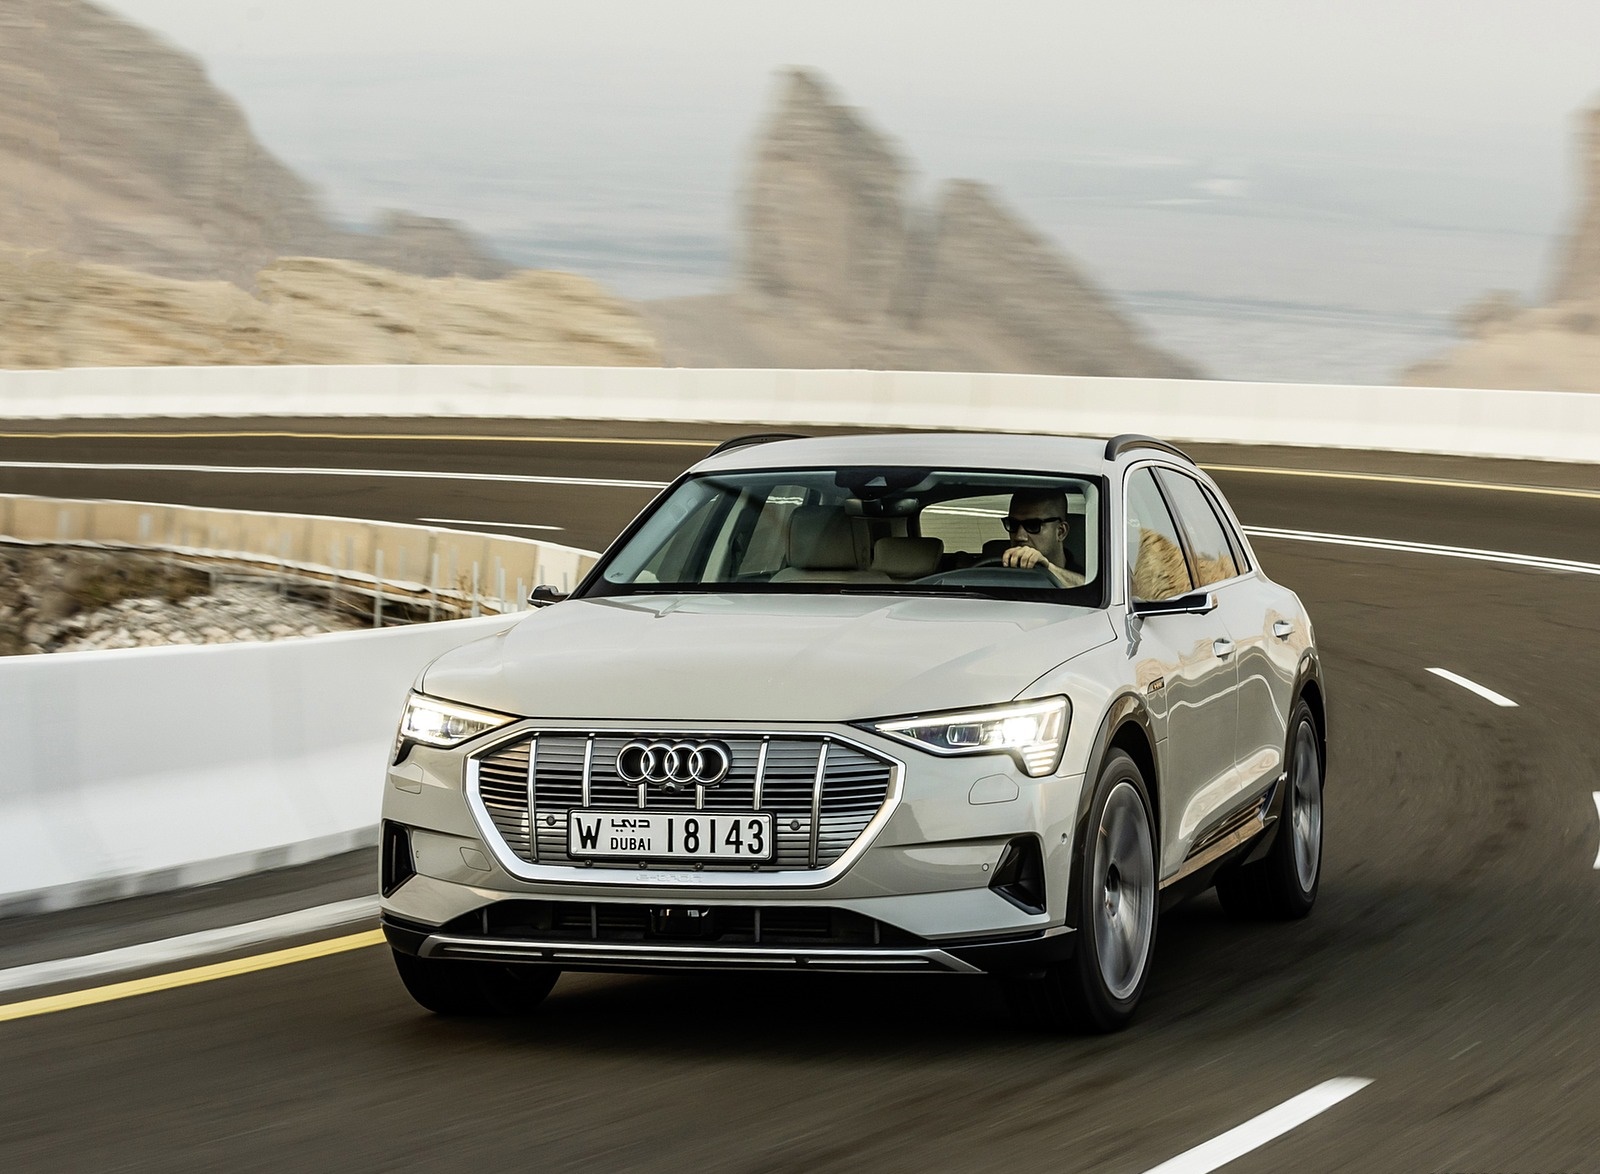 2019 Audi e-tron (Color: Siam Beige) Front Three-Quarter Wallpapers #139 of 234